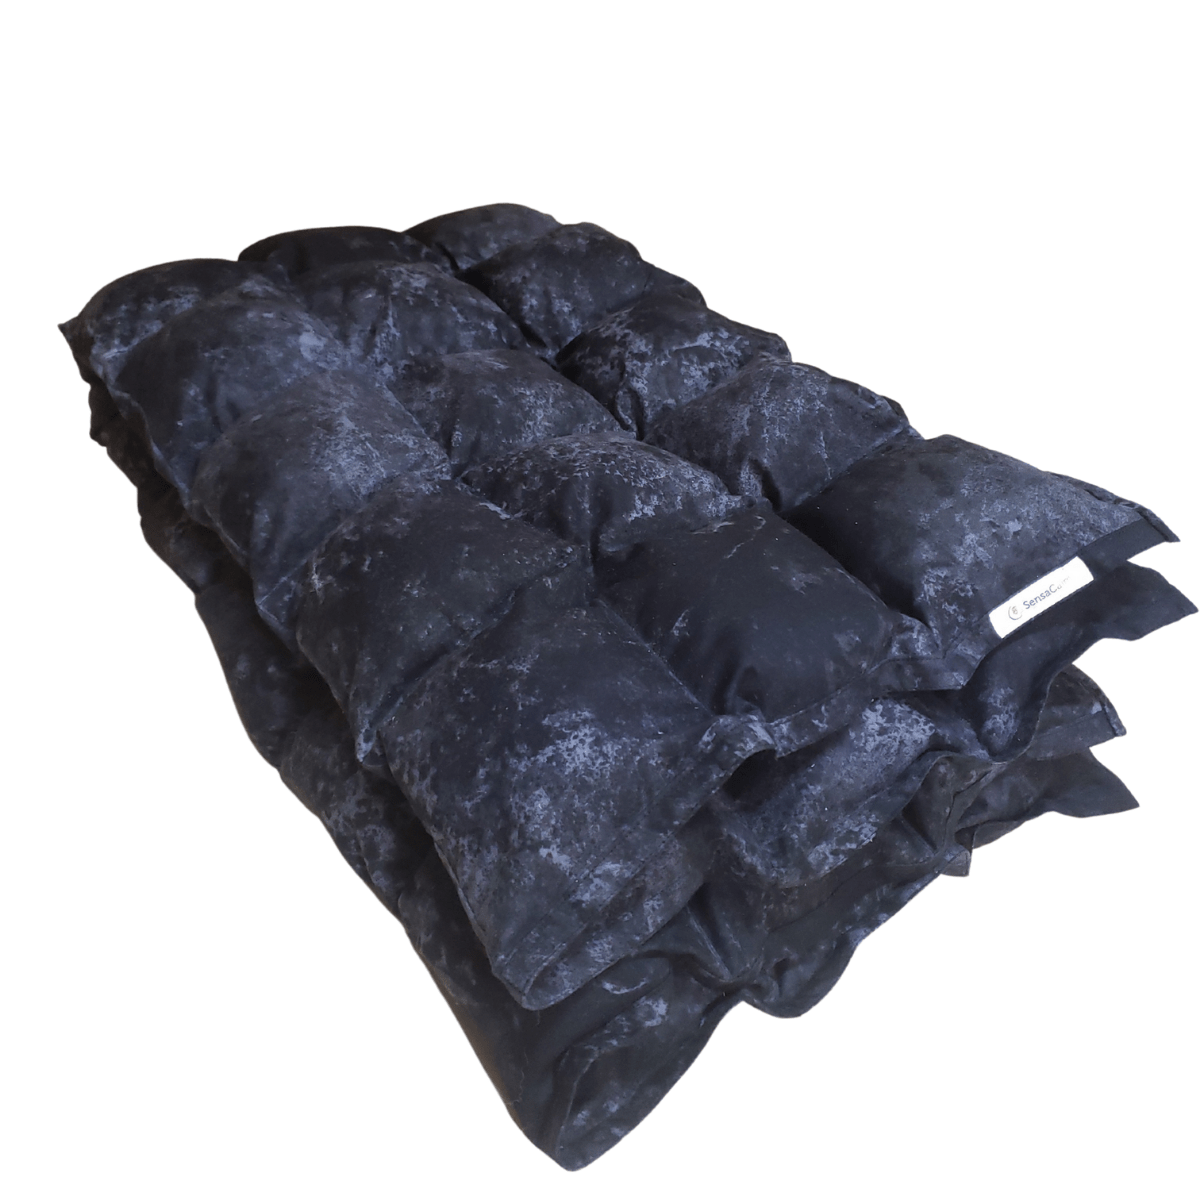 SensaCalm Weighted Blanket - Queen (62" x 72") For Adults Classic Weighted Blanket Stone Black